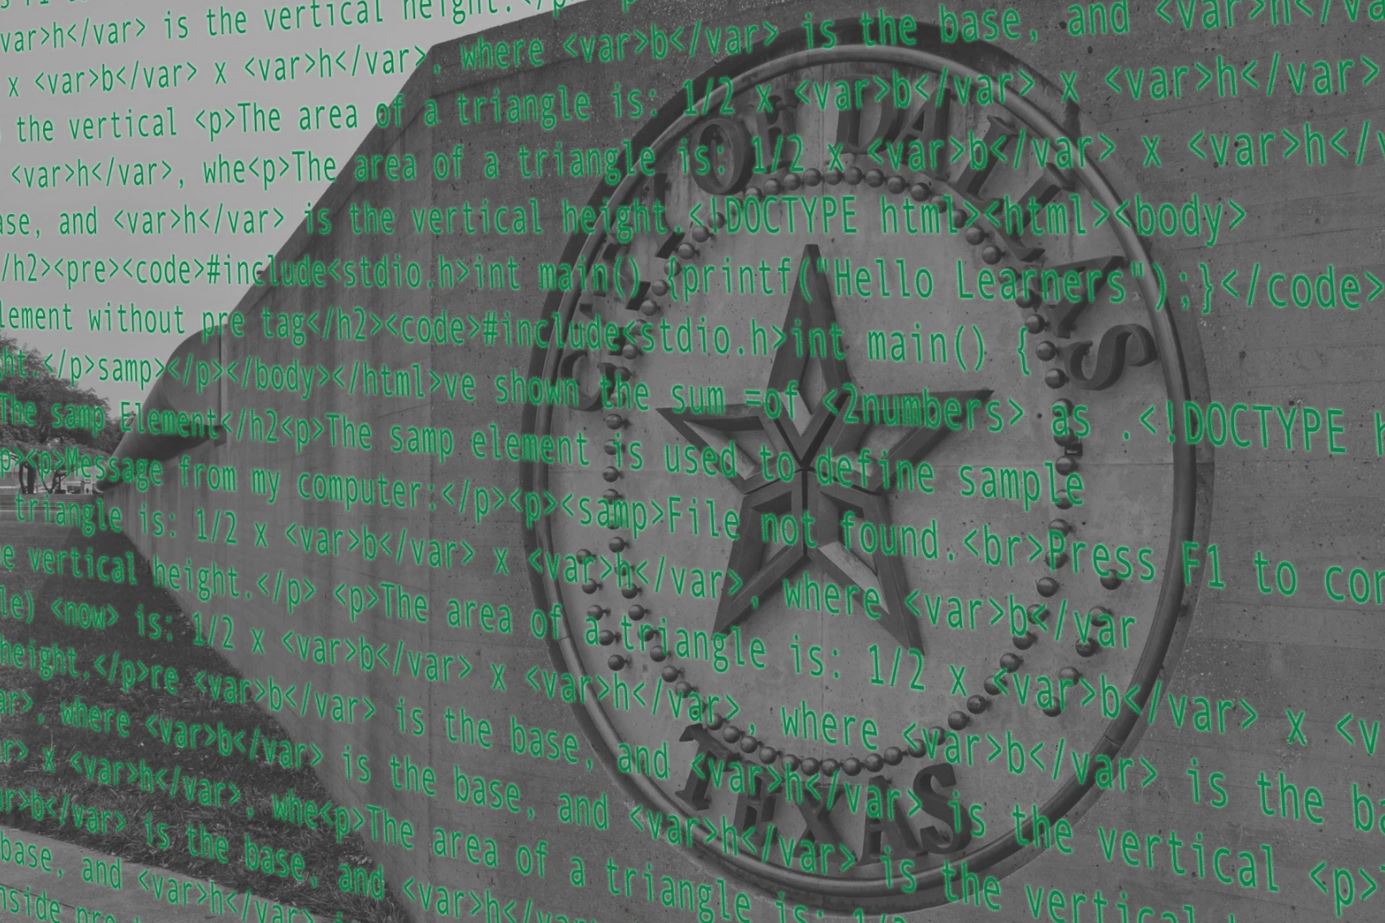 UT Dallas Joins National Effort to Respond to Cyber Attacks on Public Infrastructure